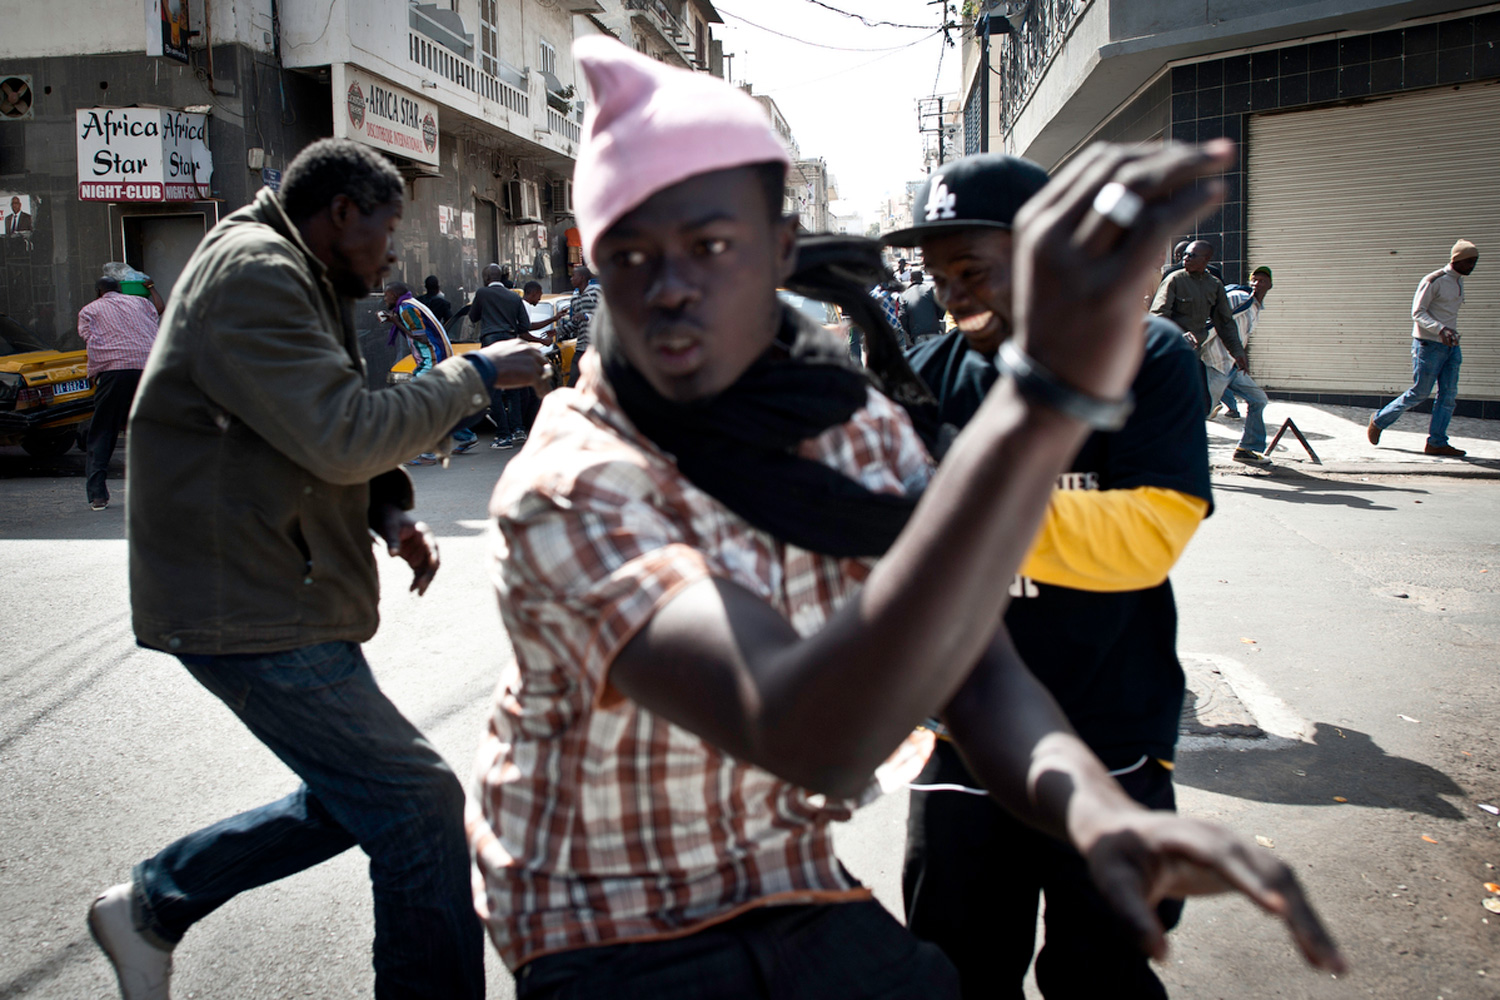 Feb. 17, 2012. Anti-government protesters and police clash in running street battles of rock throwing and tear gas in the streets of Dakar, Senegal.